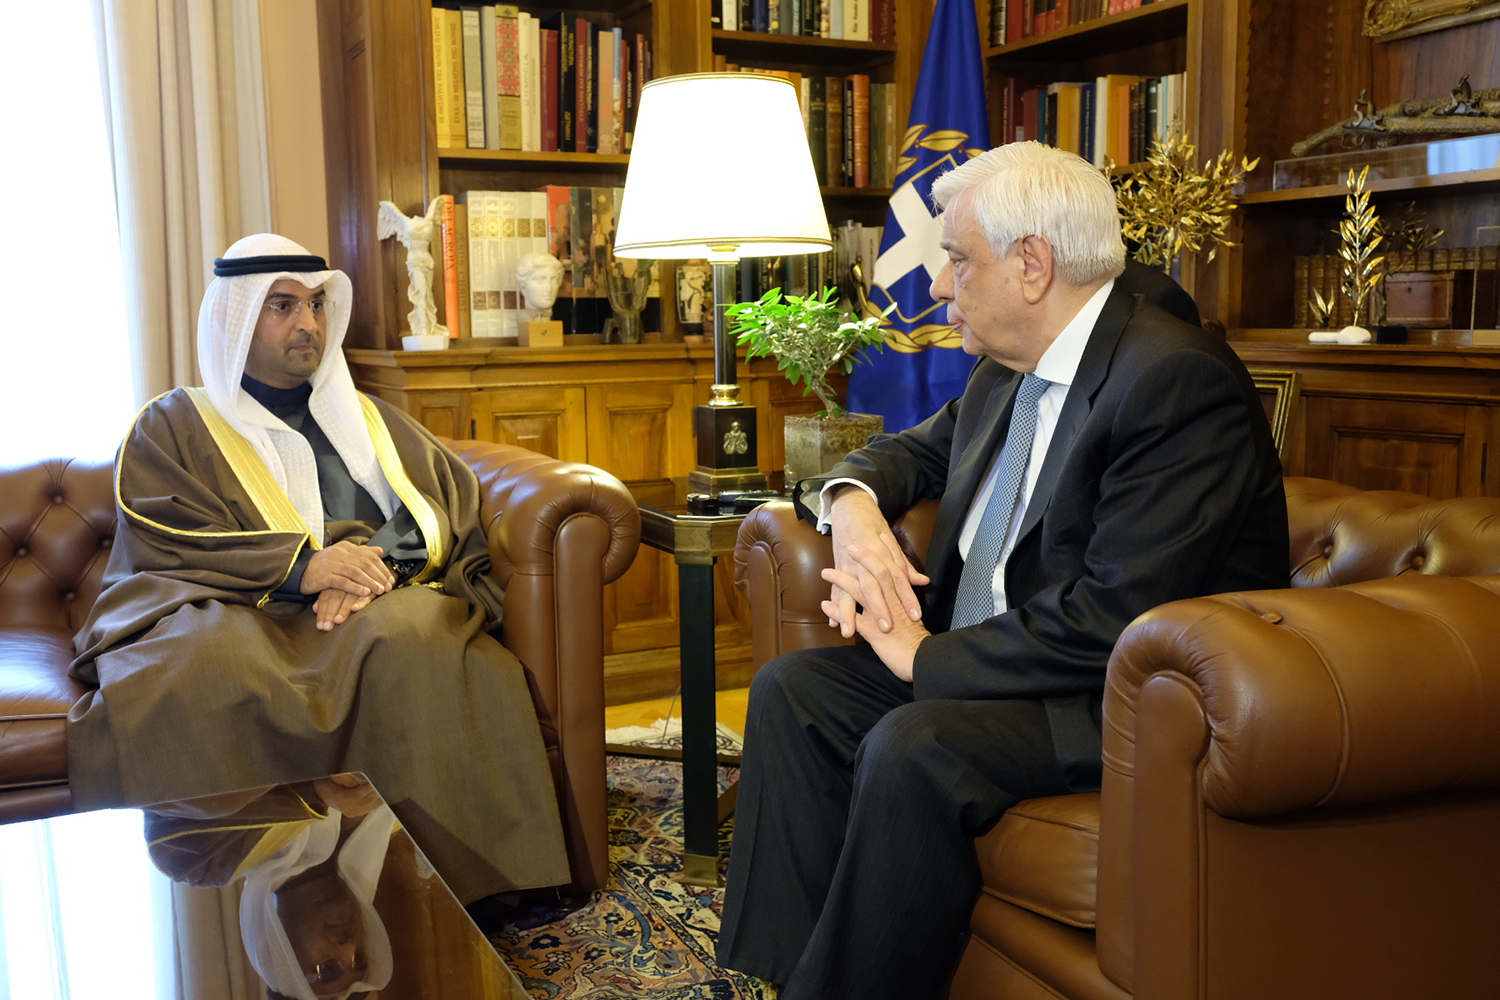 Kuwait's Minister of Finance Nayef Al-Hajraf meets with Greek President Prokopis Pavlopoulos